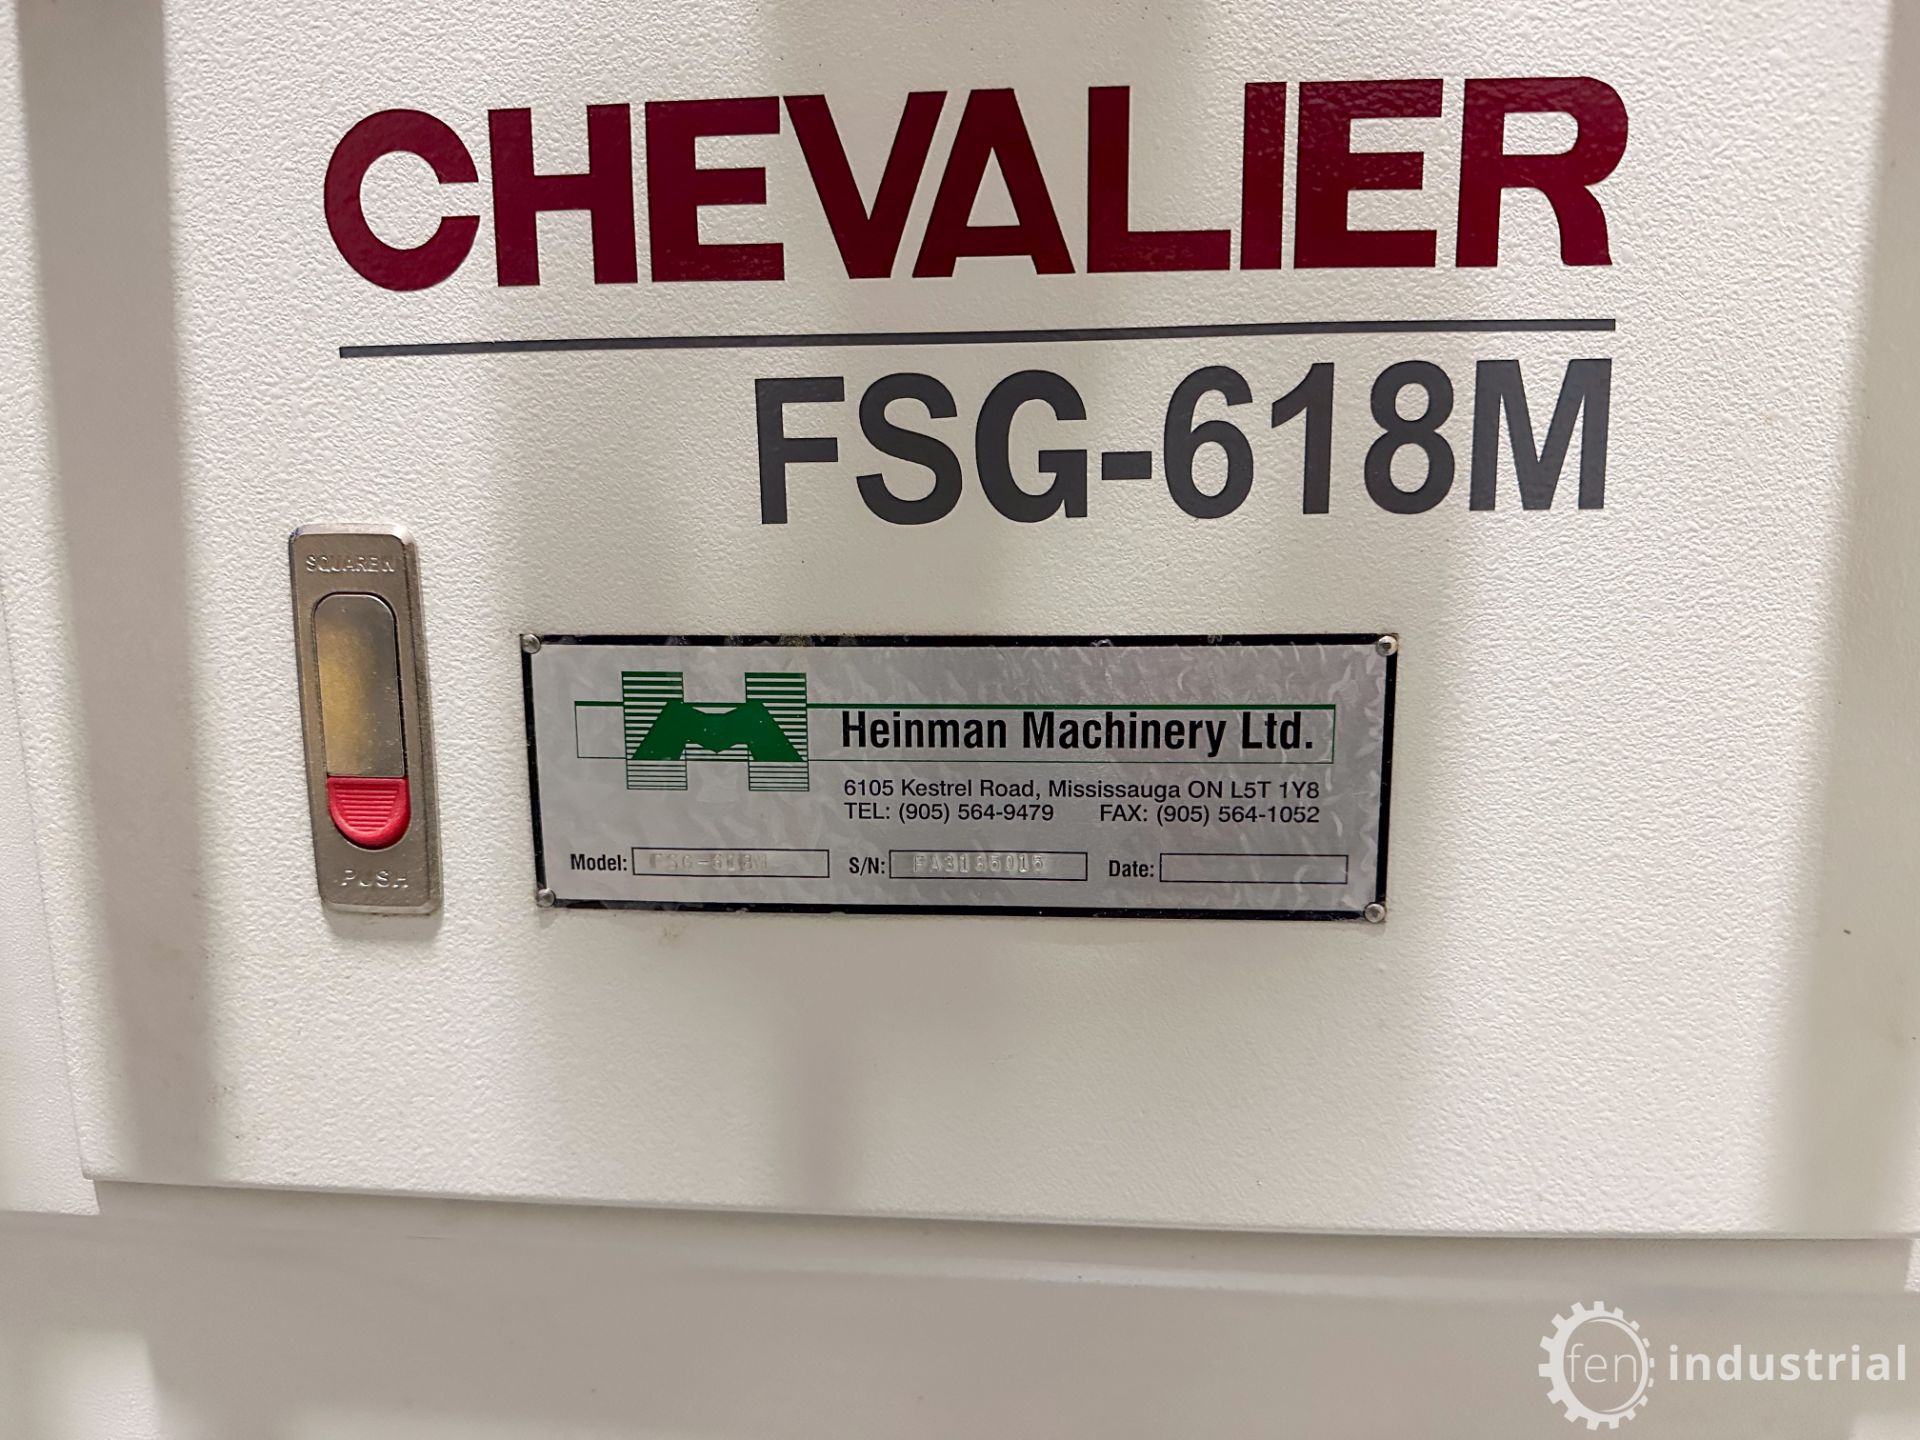 NEW / UNUSED CHEVALIER FSG-618M MANUAL SURFACE GRINDER, 6” X 18” MAGNETIC CHUCK, S/N FA3185015 ( - Image 5 of 39